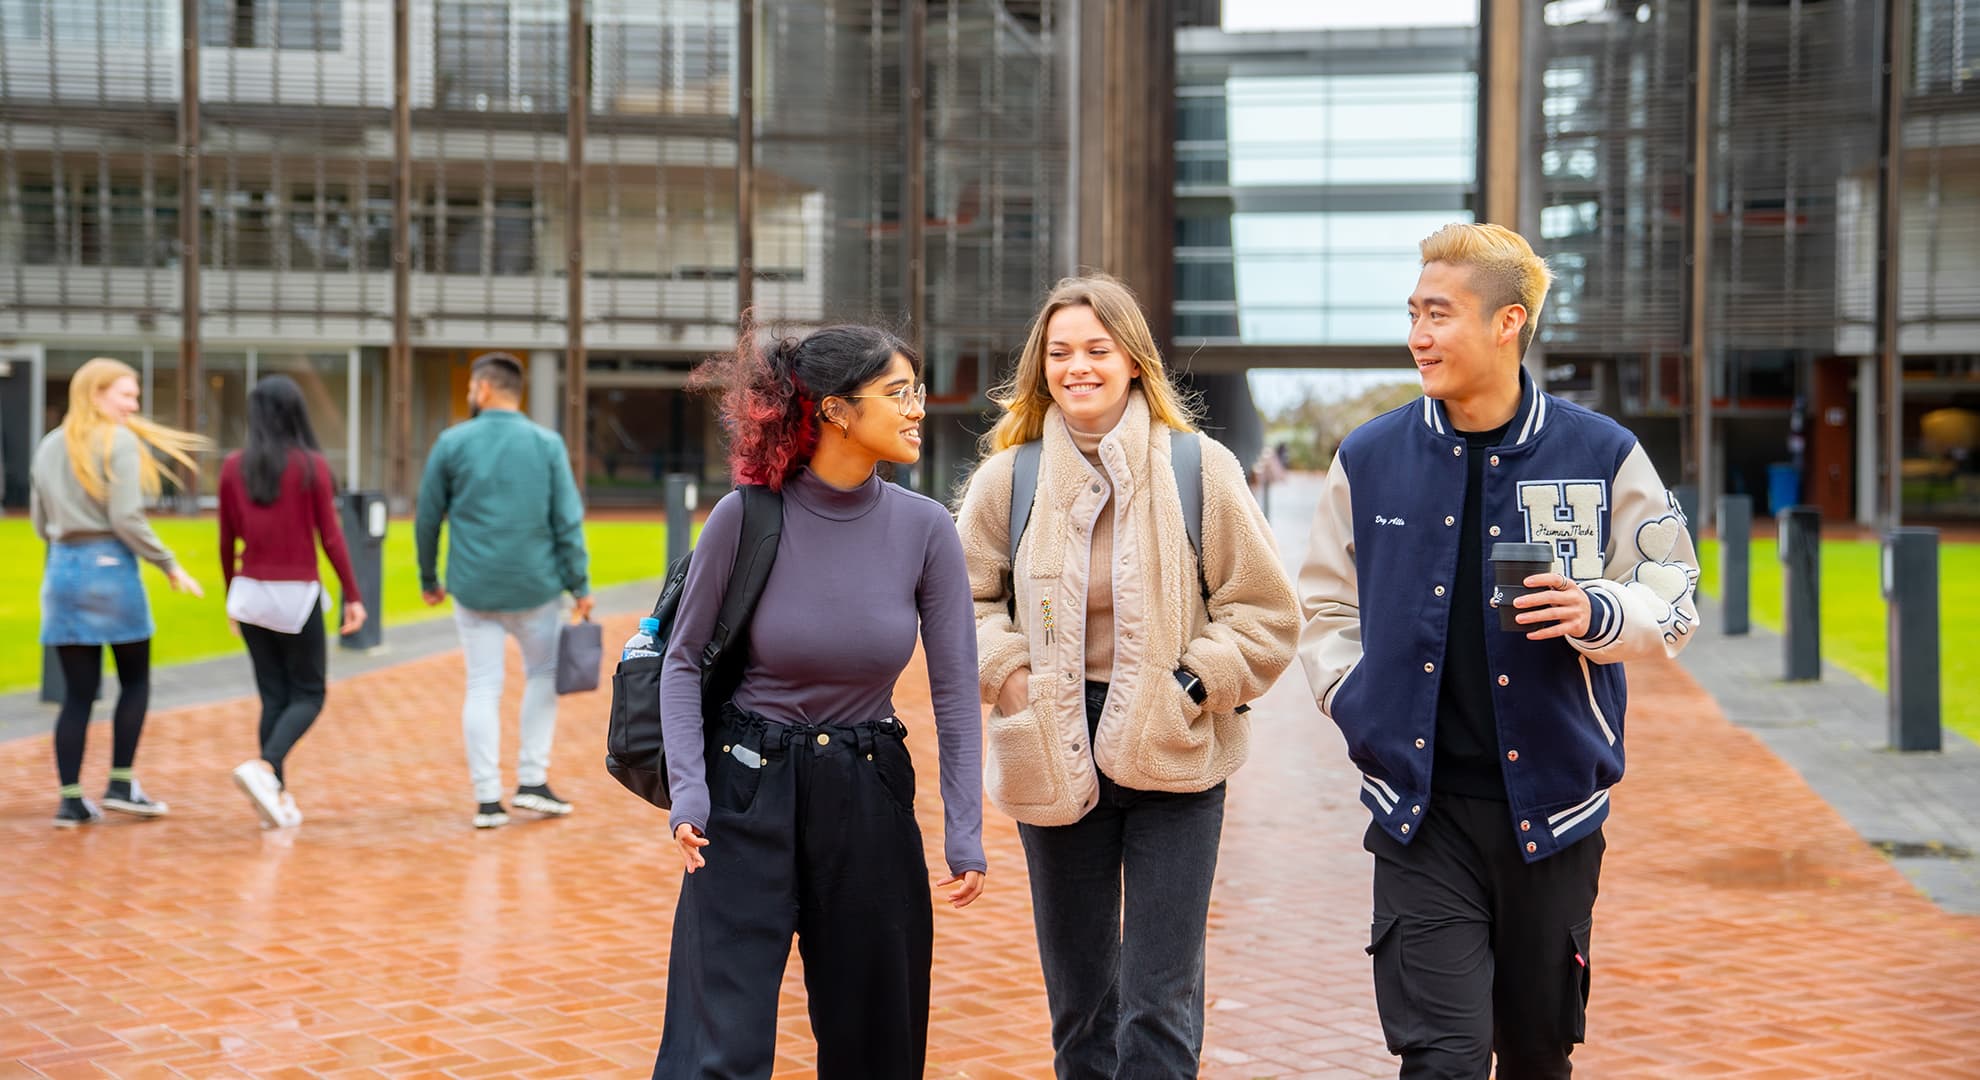 group of student walking on campus